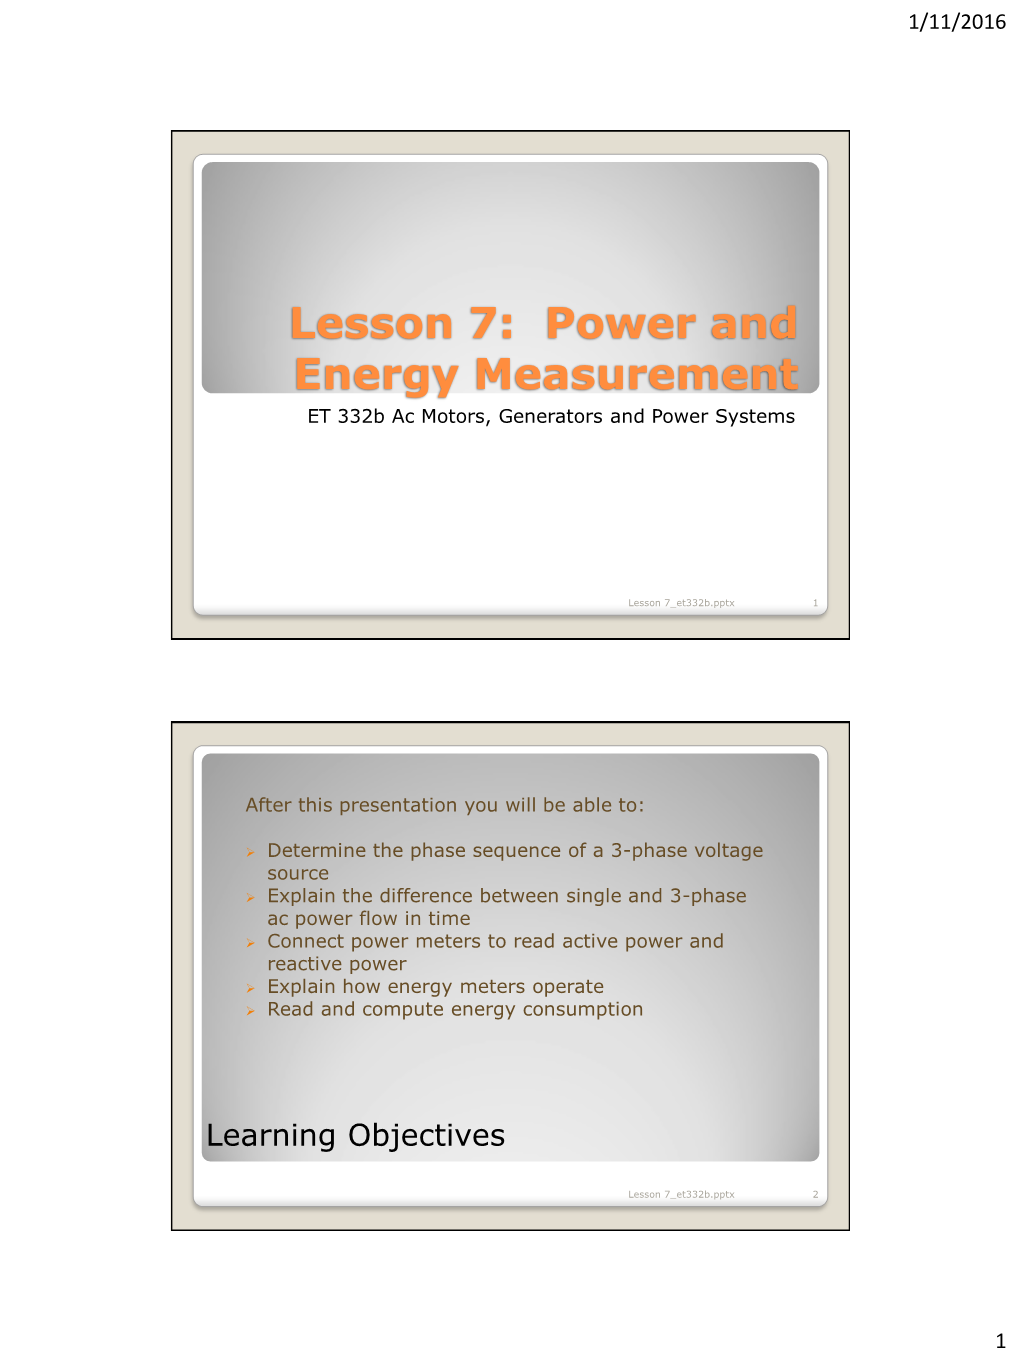 Lesson 7: Power and Energy Measurement ET 332B Ac Motors, Generators and Power Systems